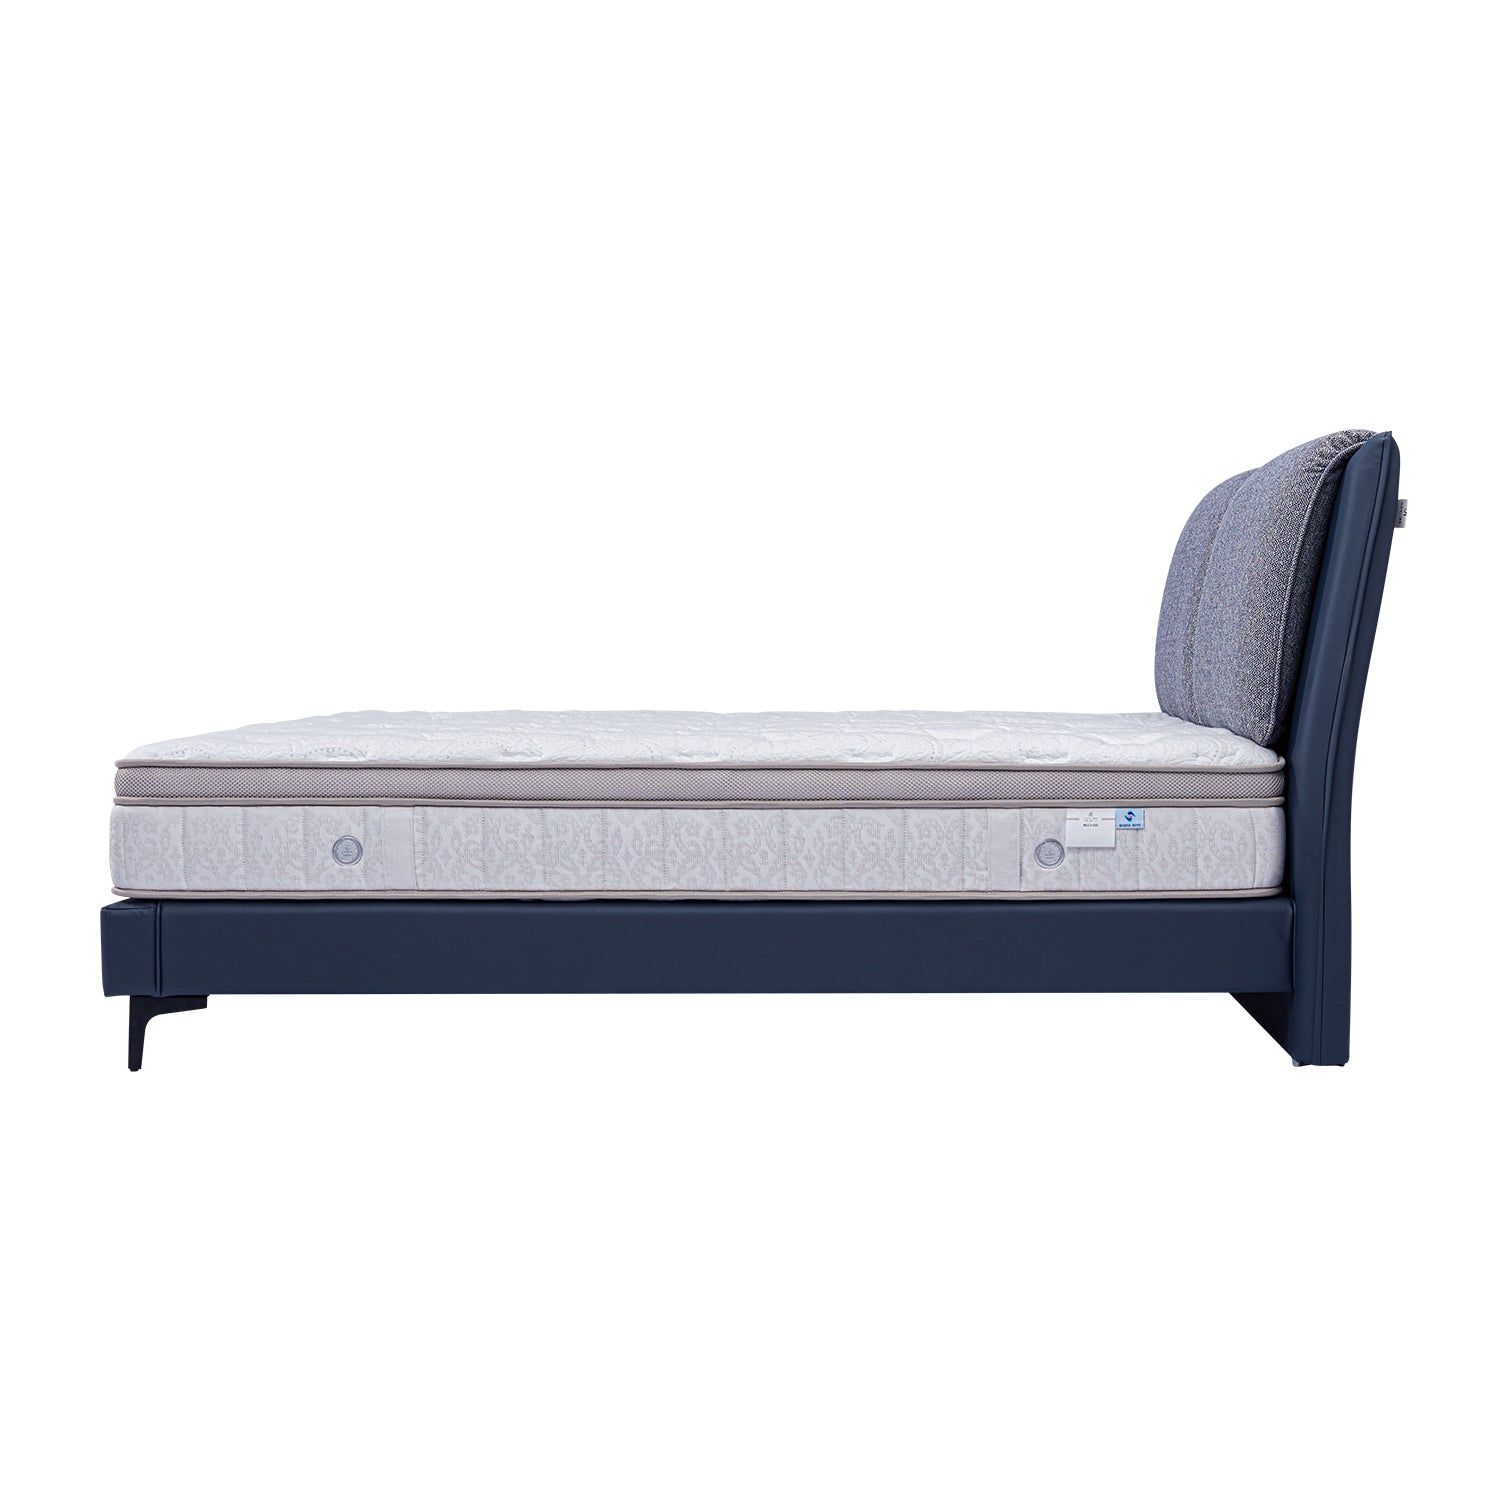 DeRUCCI Bed Frame BOC1 - 017 with mattress, featuring a sleek navy blue base and upholstered cushioned headboard